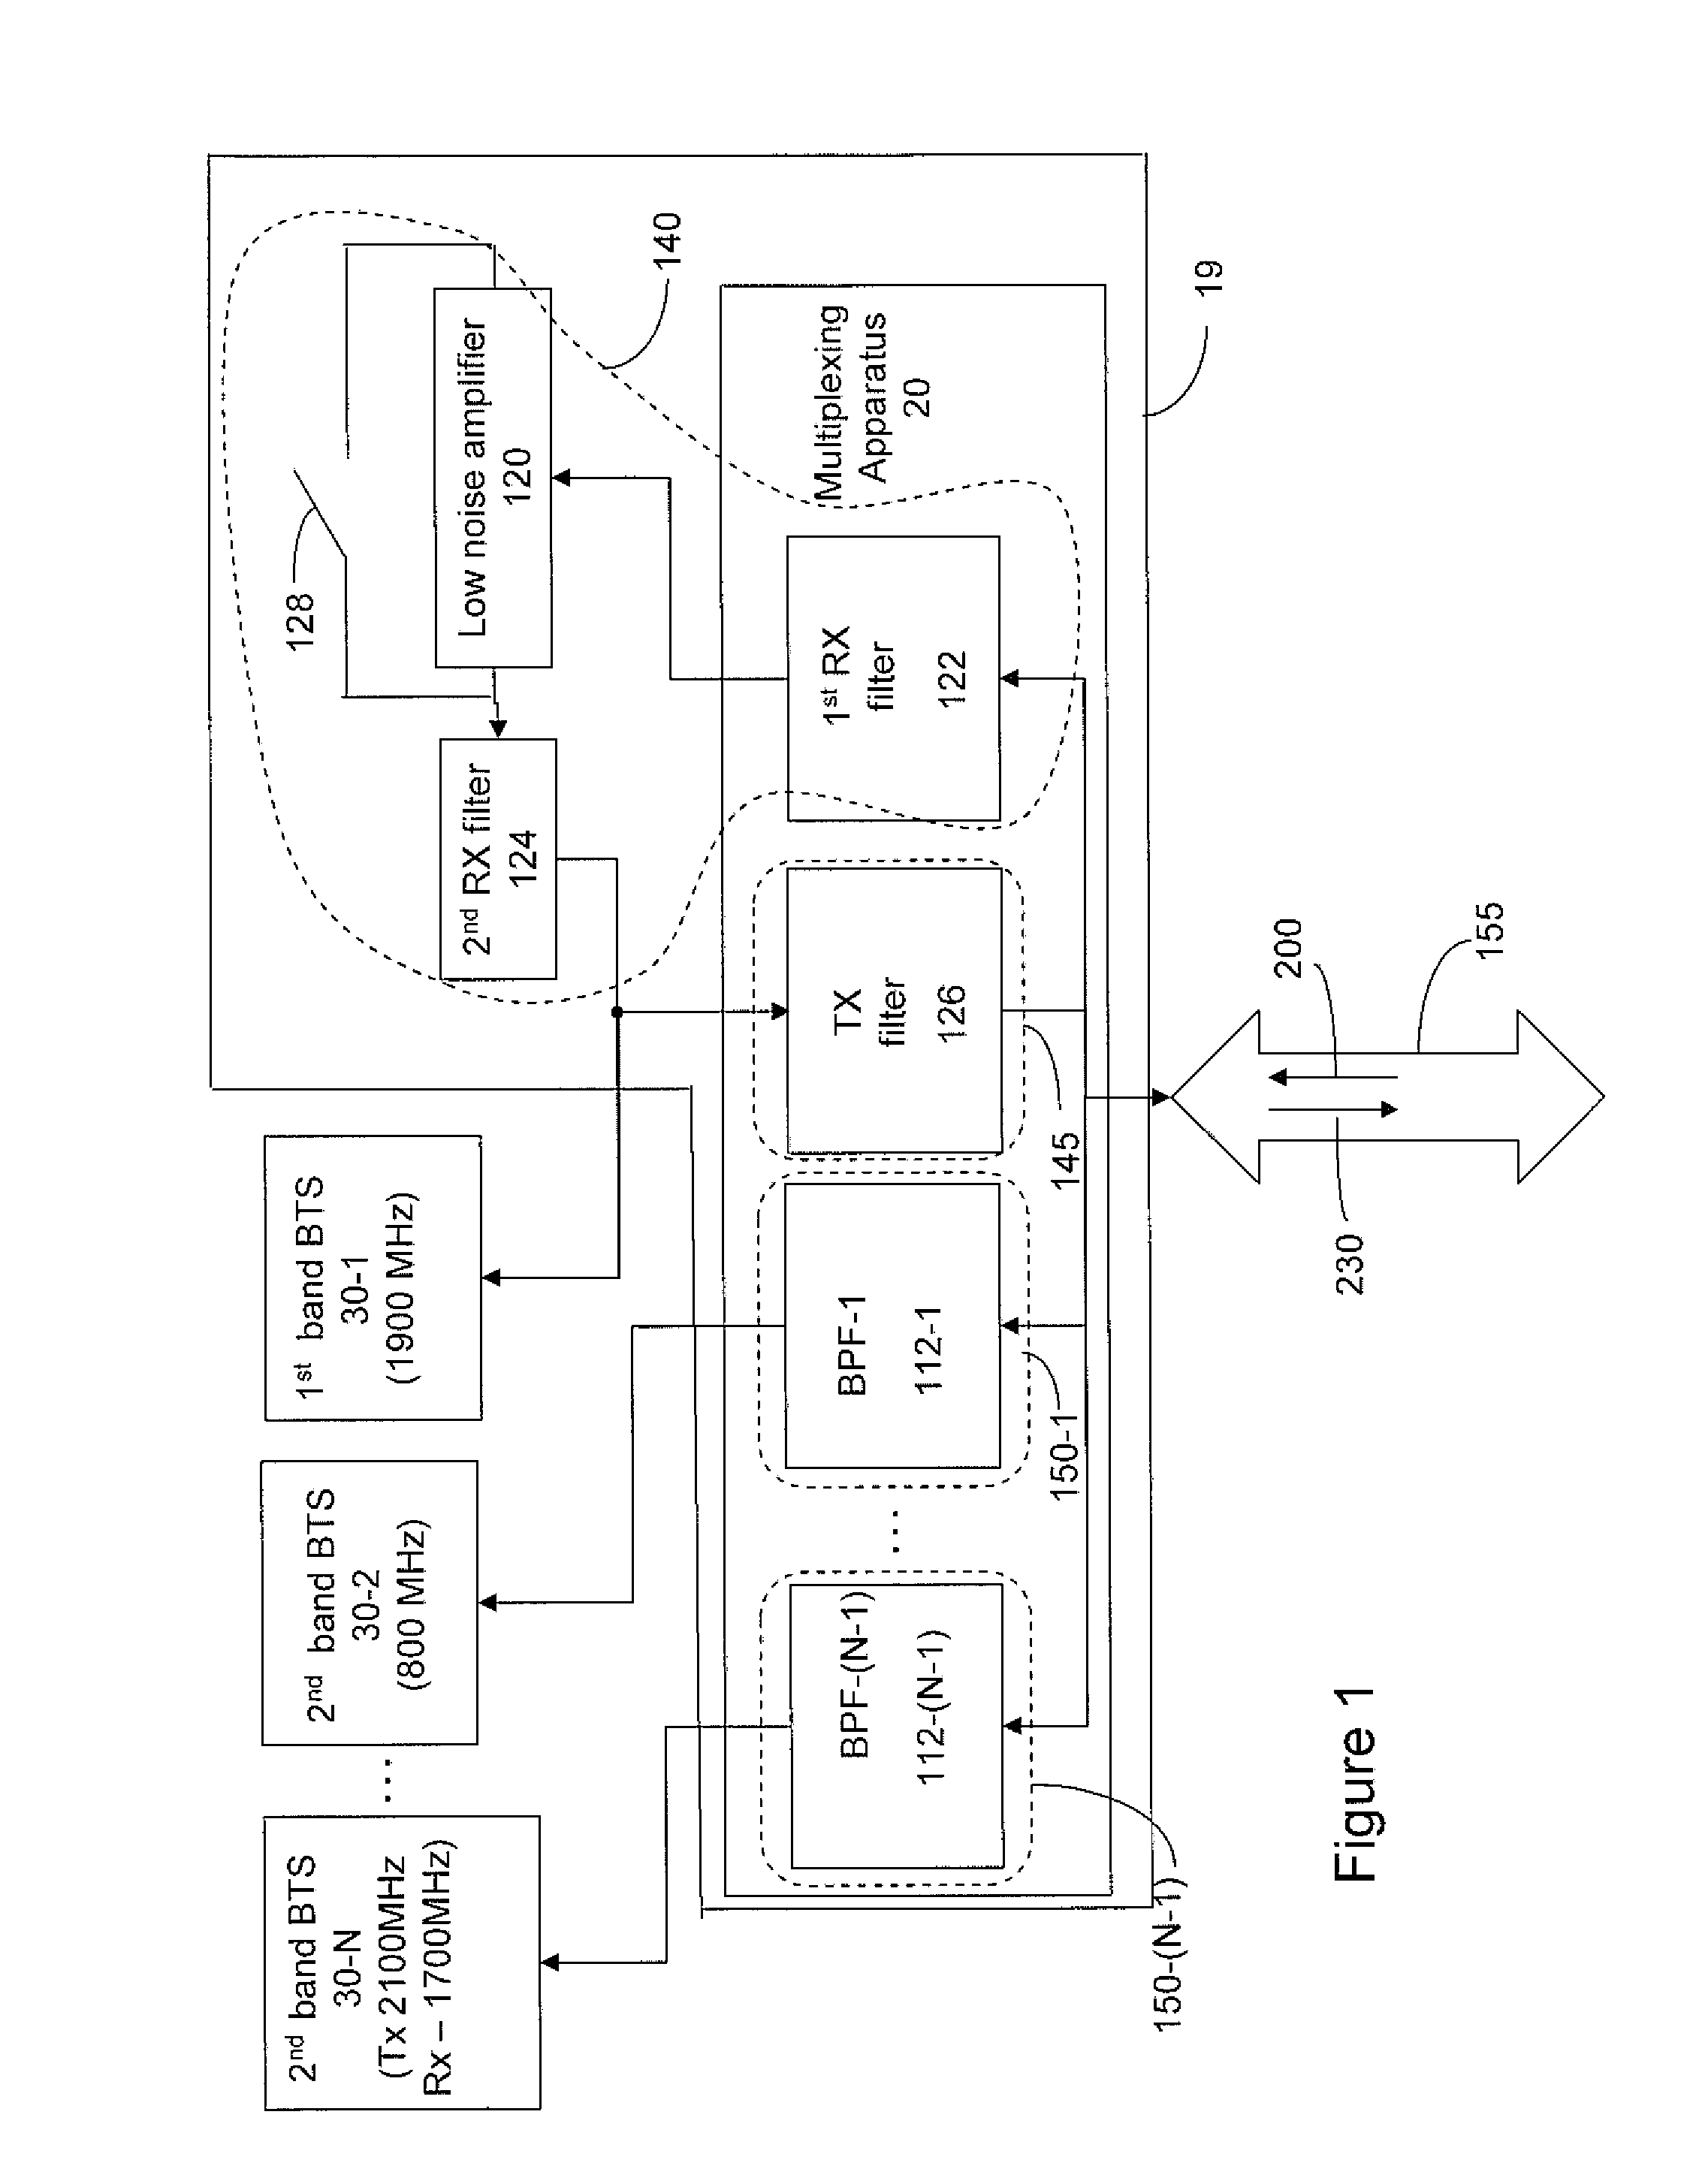 Multiplexing apparatus in a transceiver system